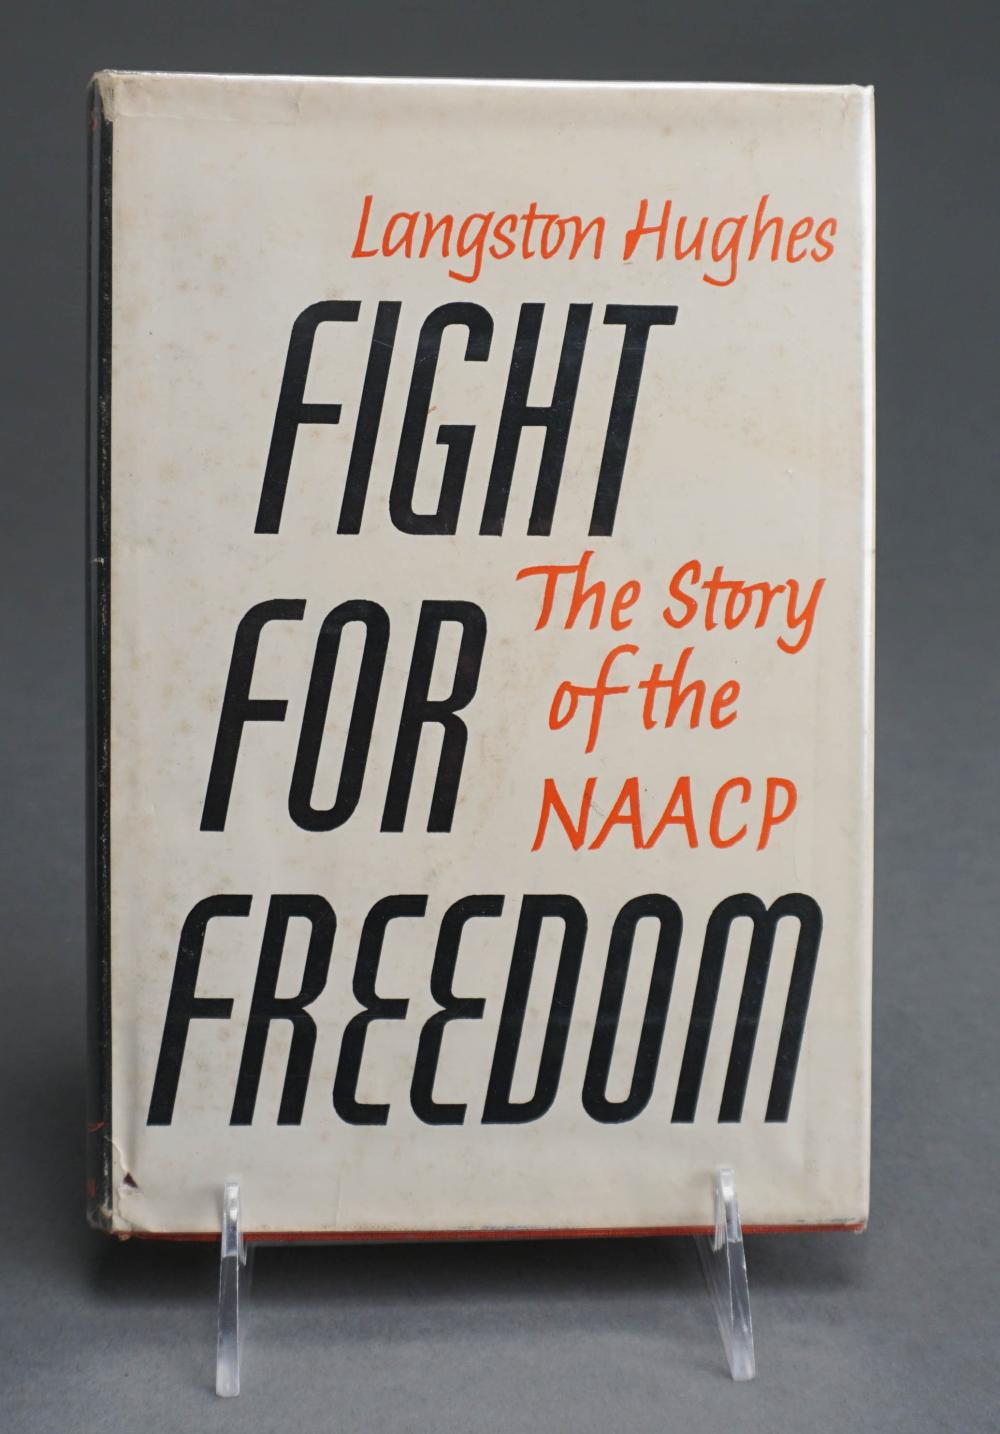 'FIGHT FOR FREEDOM: THE STORY OF